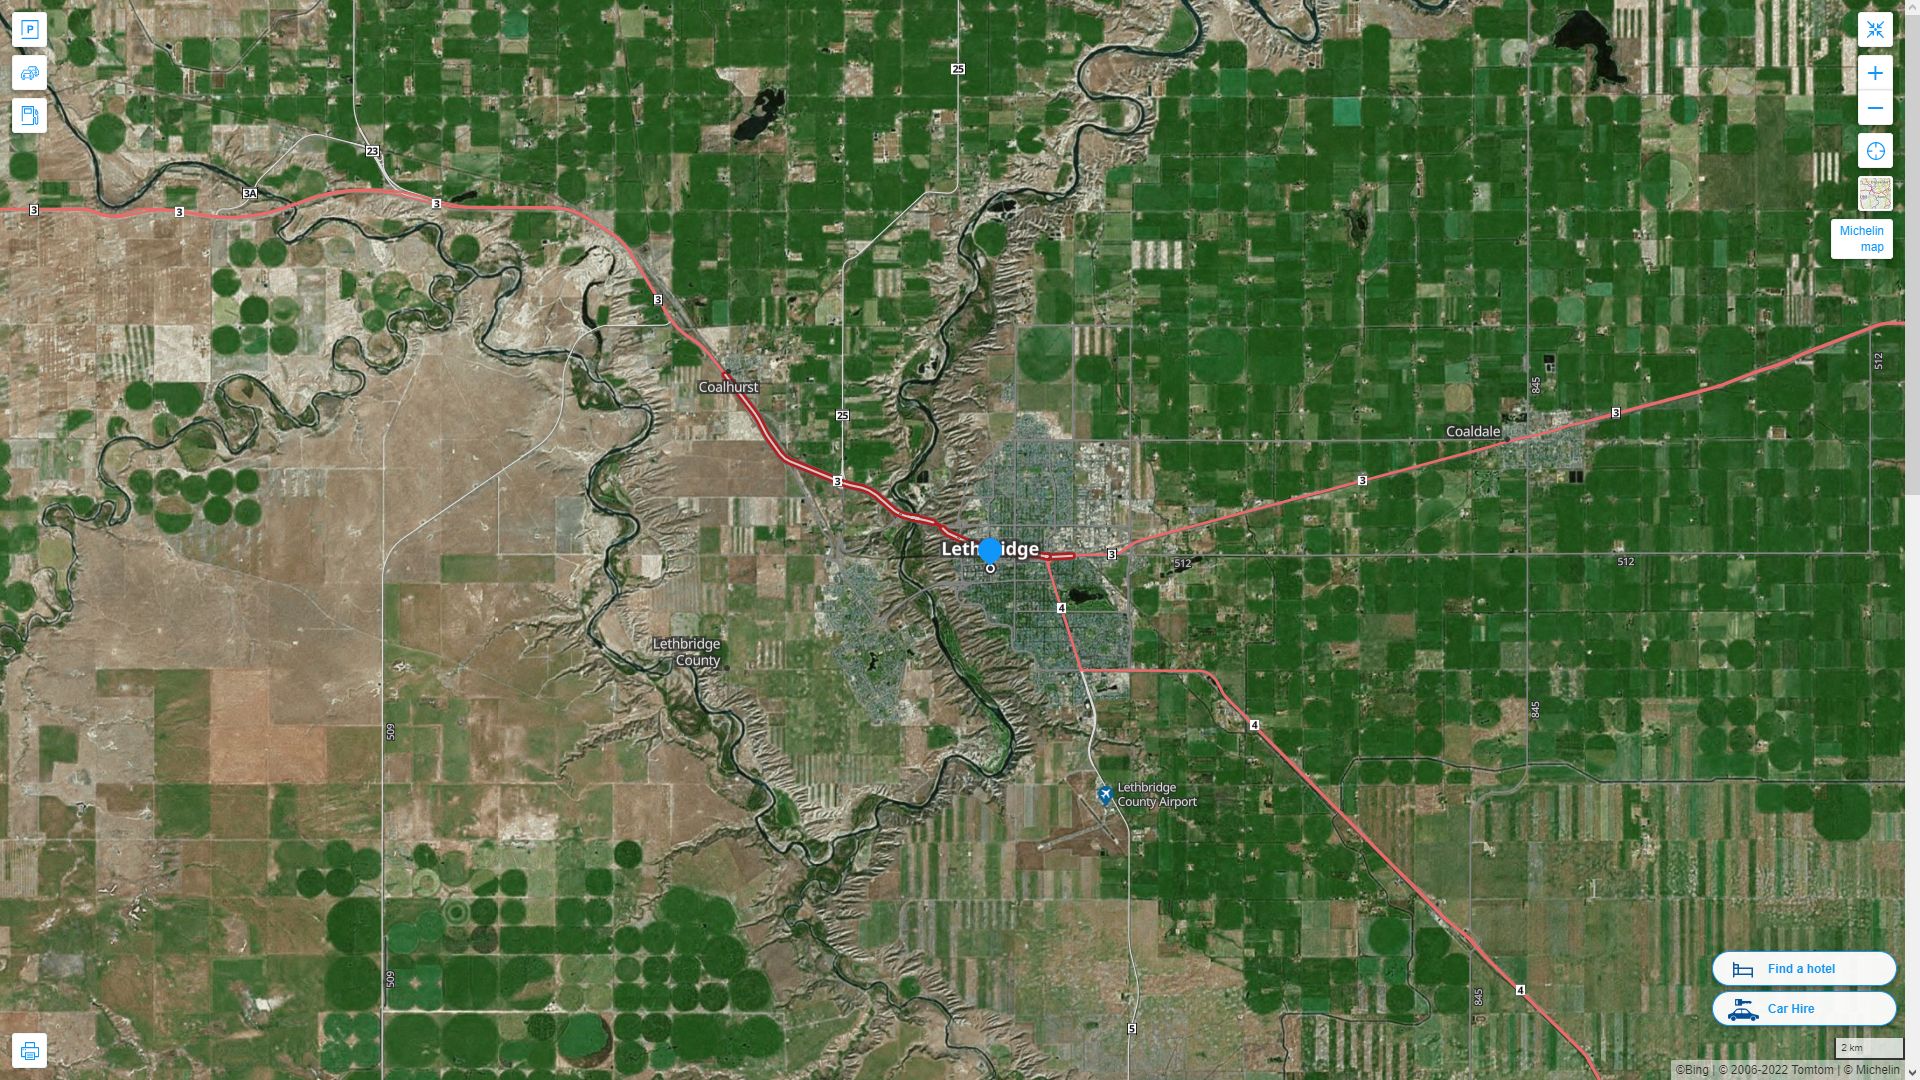 Lethbridge Highway and Road Map with Satellite View